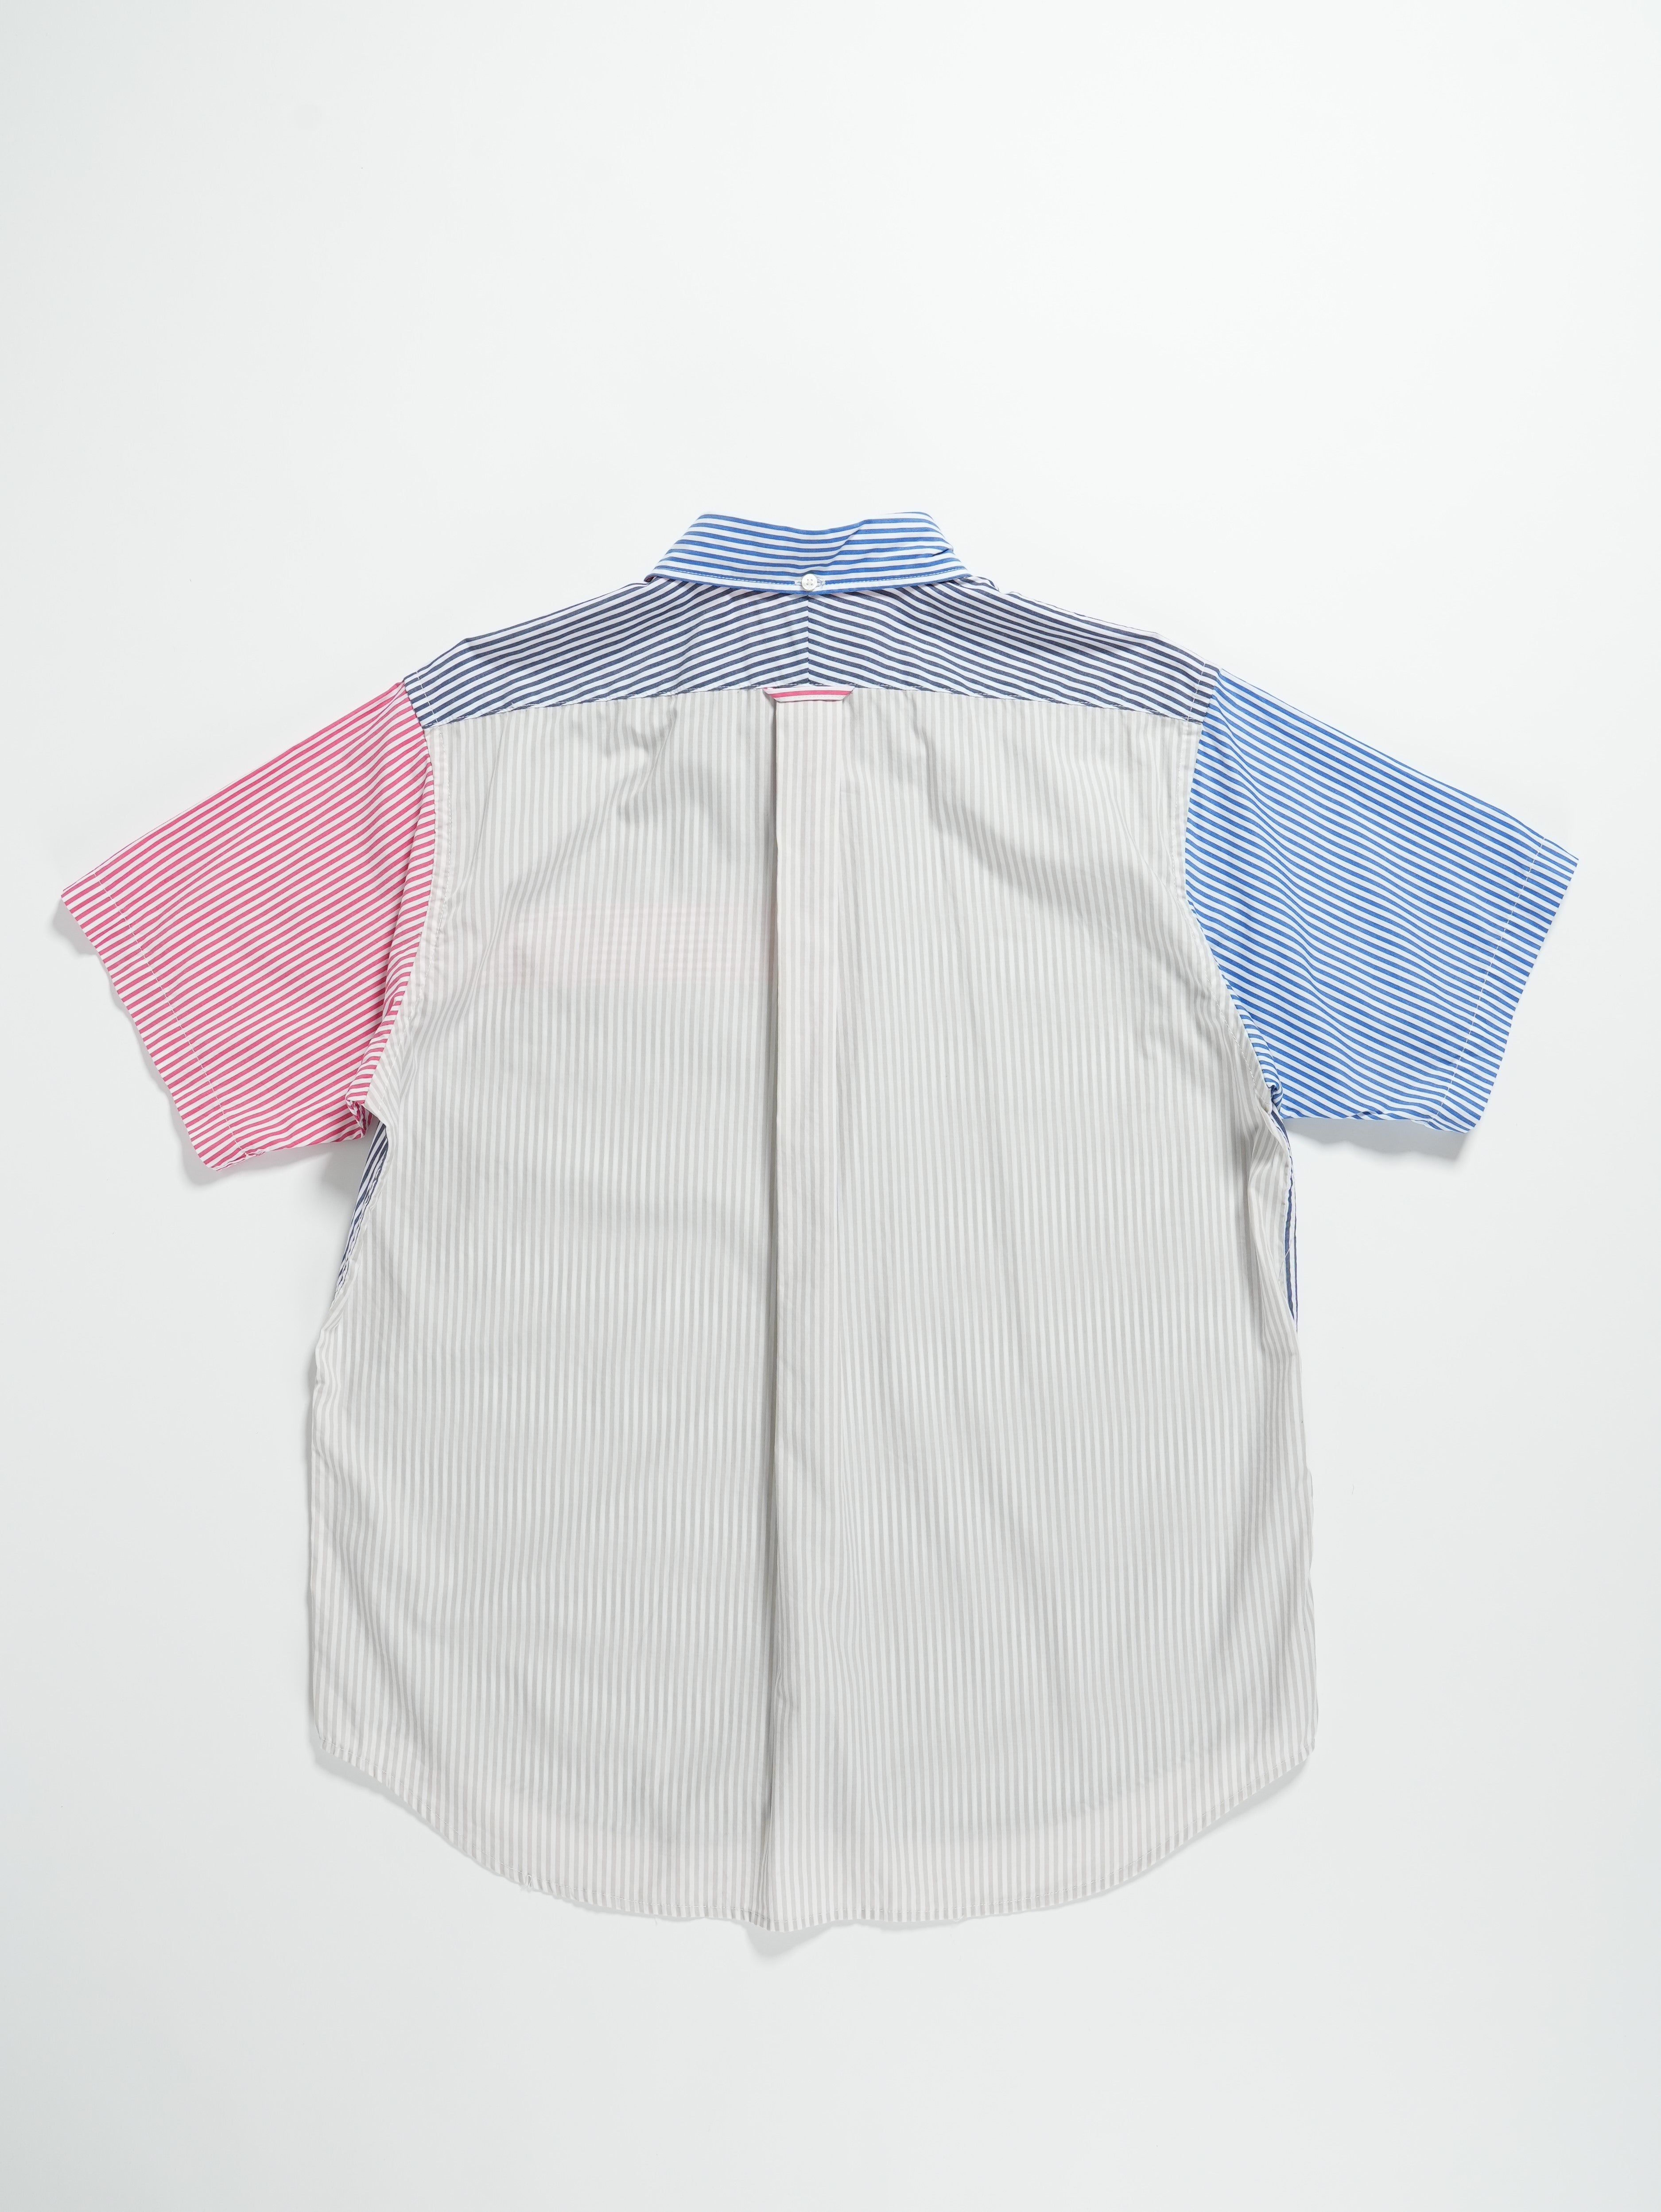 Engineered Garments Popover BD Shirt - Navy Candy Stripe Broadcloth